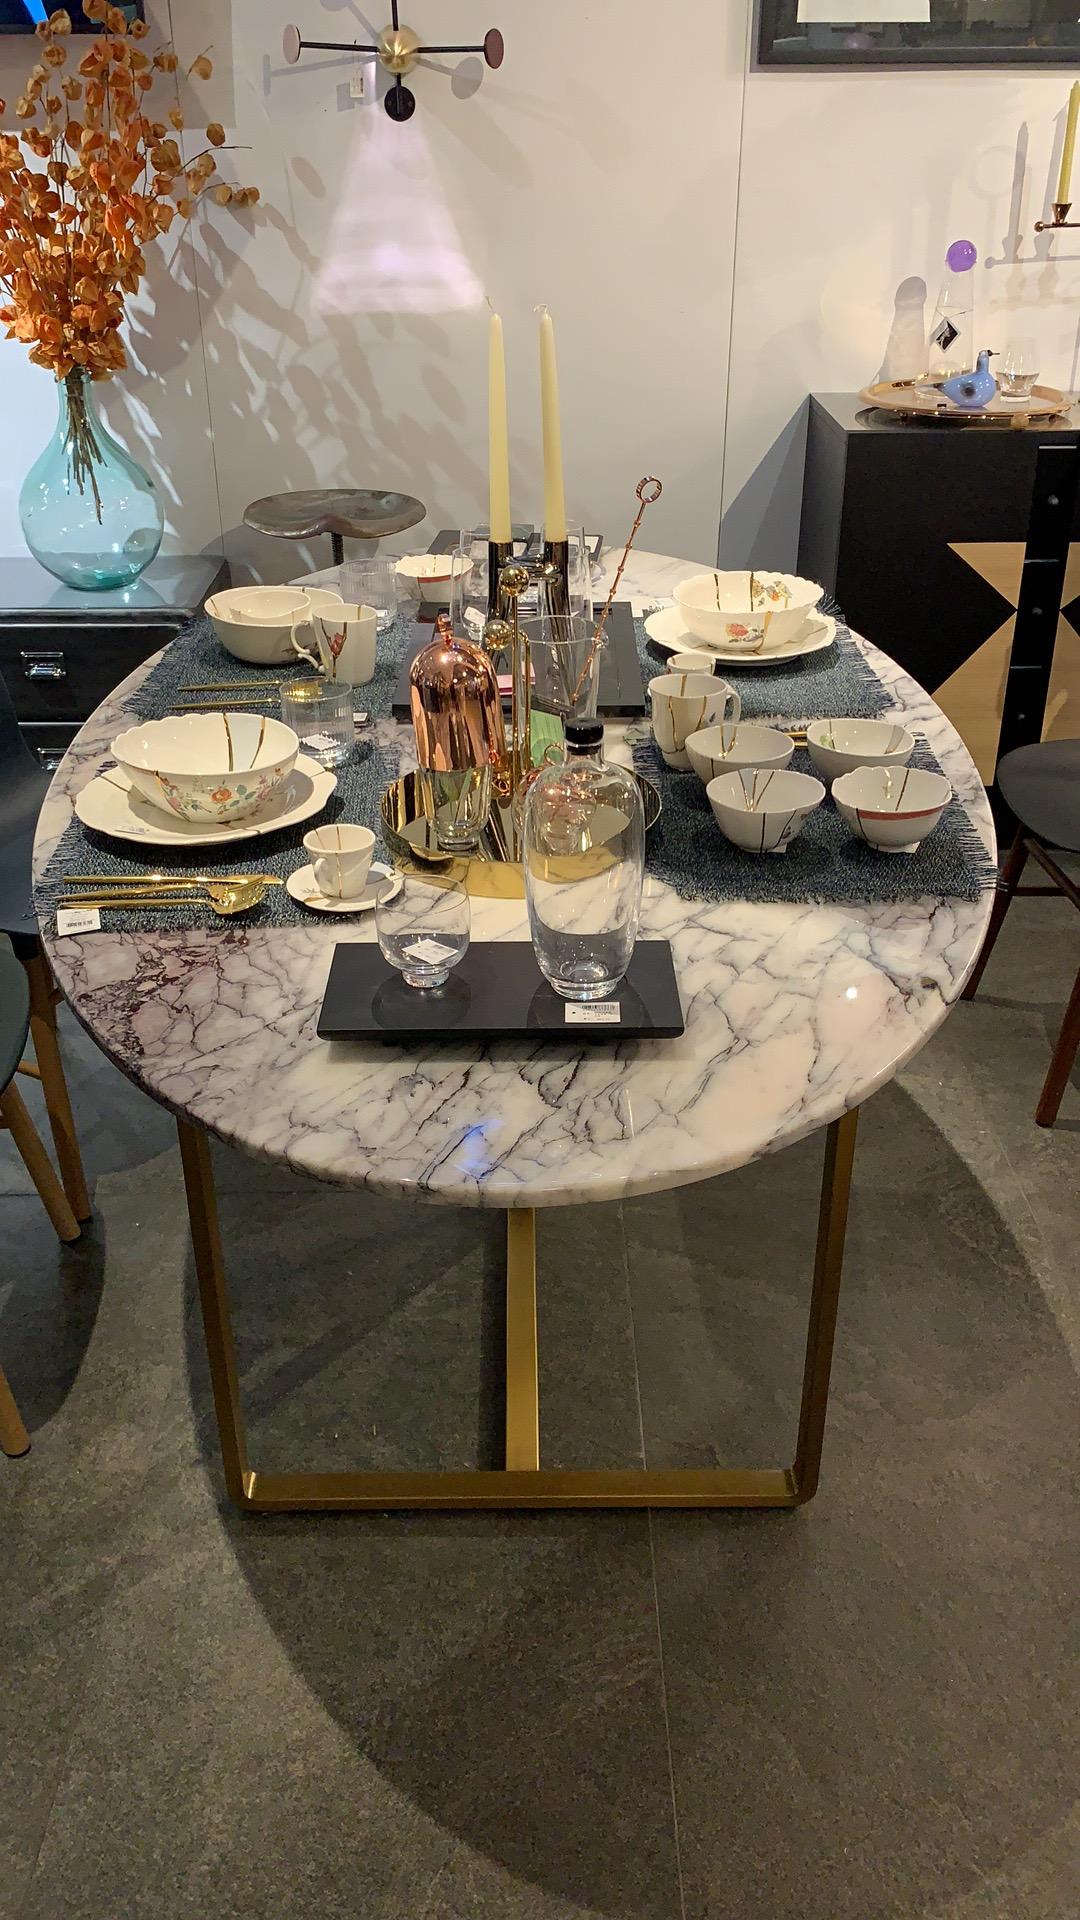 Contemporary NORDST JERRY Dining Table, Italian Grey Rain Marble, Danish Modern Design, New For Sale